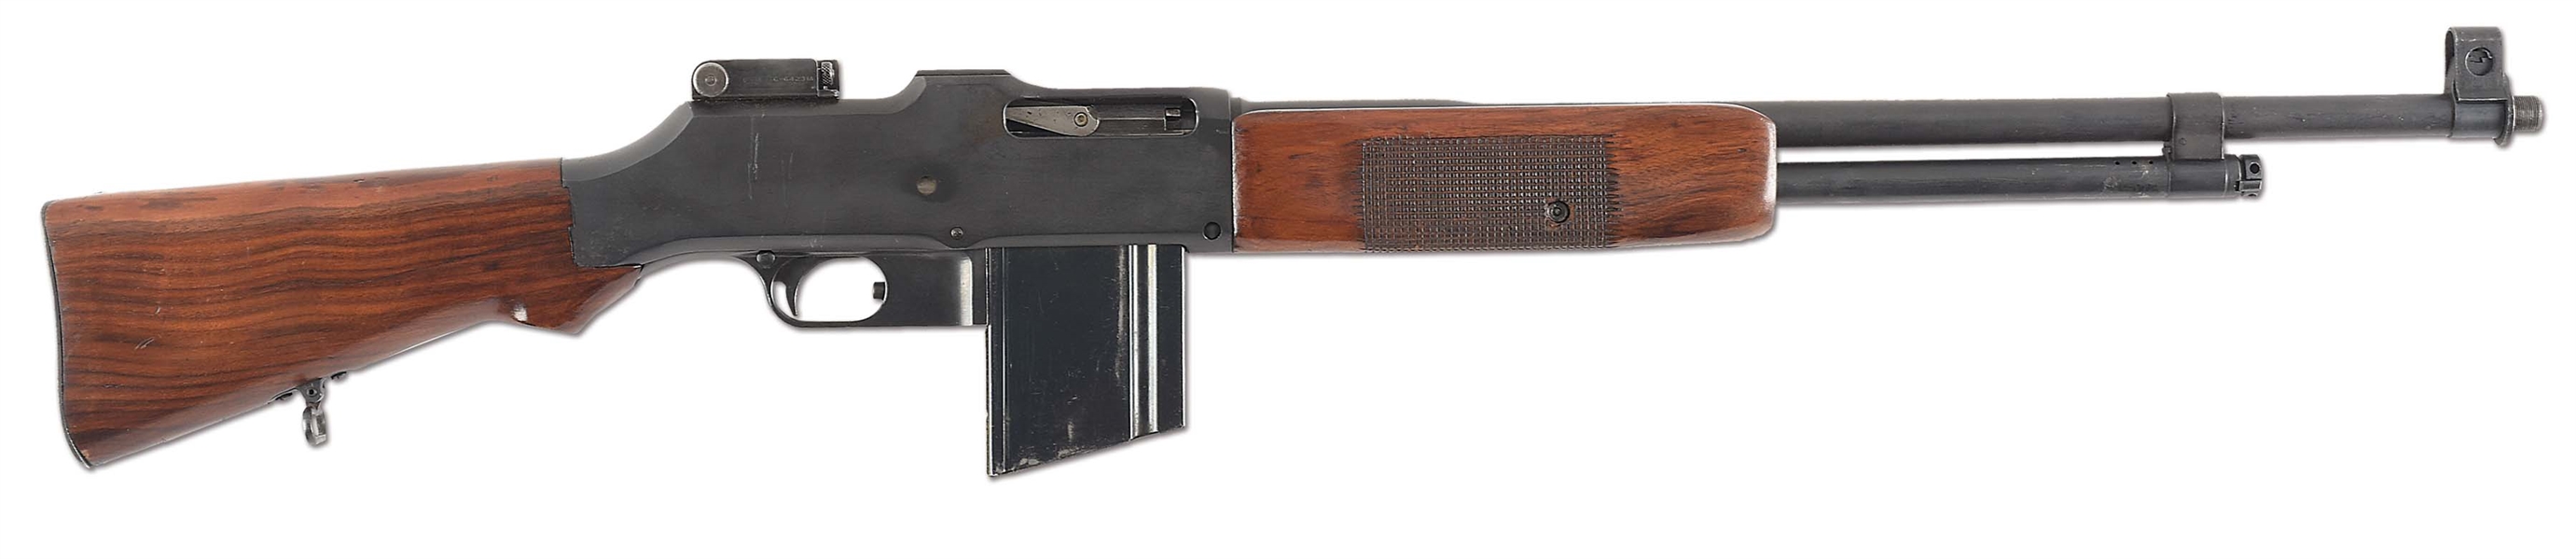 (N) VERY FINE WINCHESTER MODEL 1918 BROWNING AUTOMATIC RIFLE (B.A.R) MACHINE GUN RETROFITTED TO 1918A2 CONFIGURATION WITH ORIGINAL PARTS RETAINED (CURIO AND RELIC).